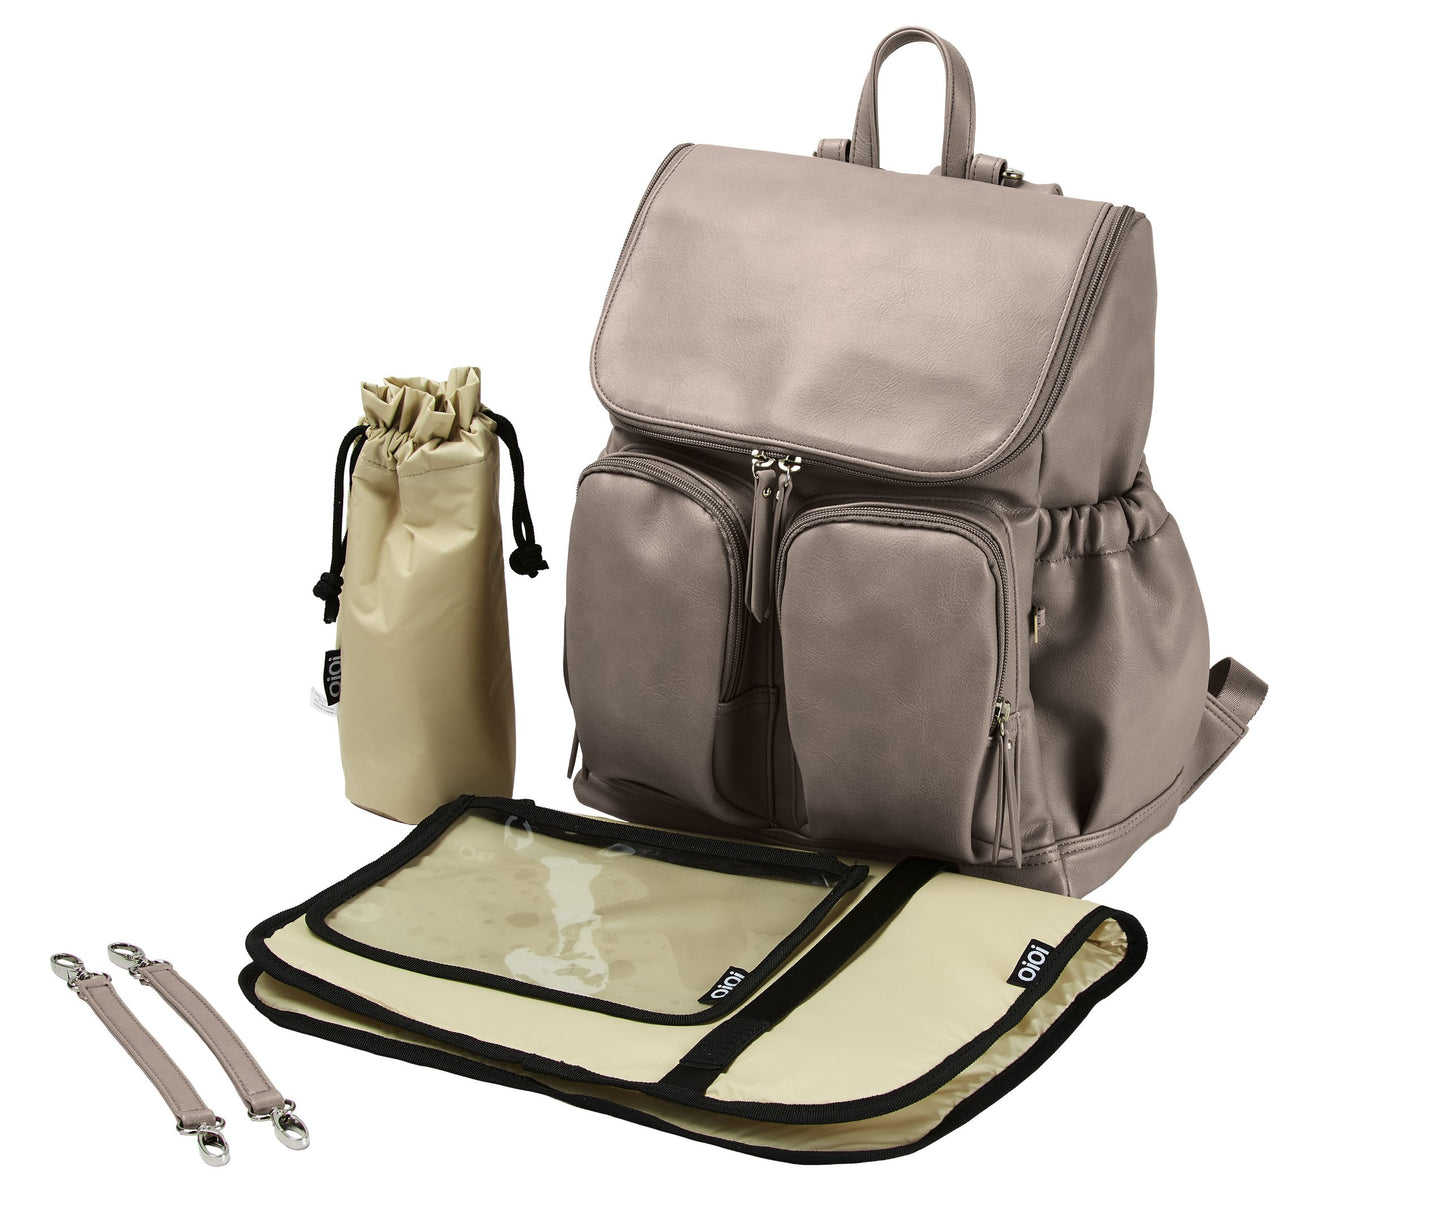 OiOi Signature Faux Leather Nappy Backpack taupe